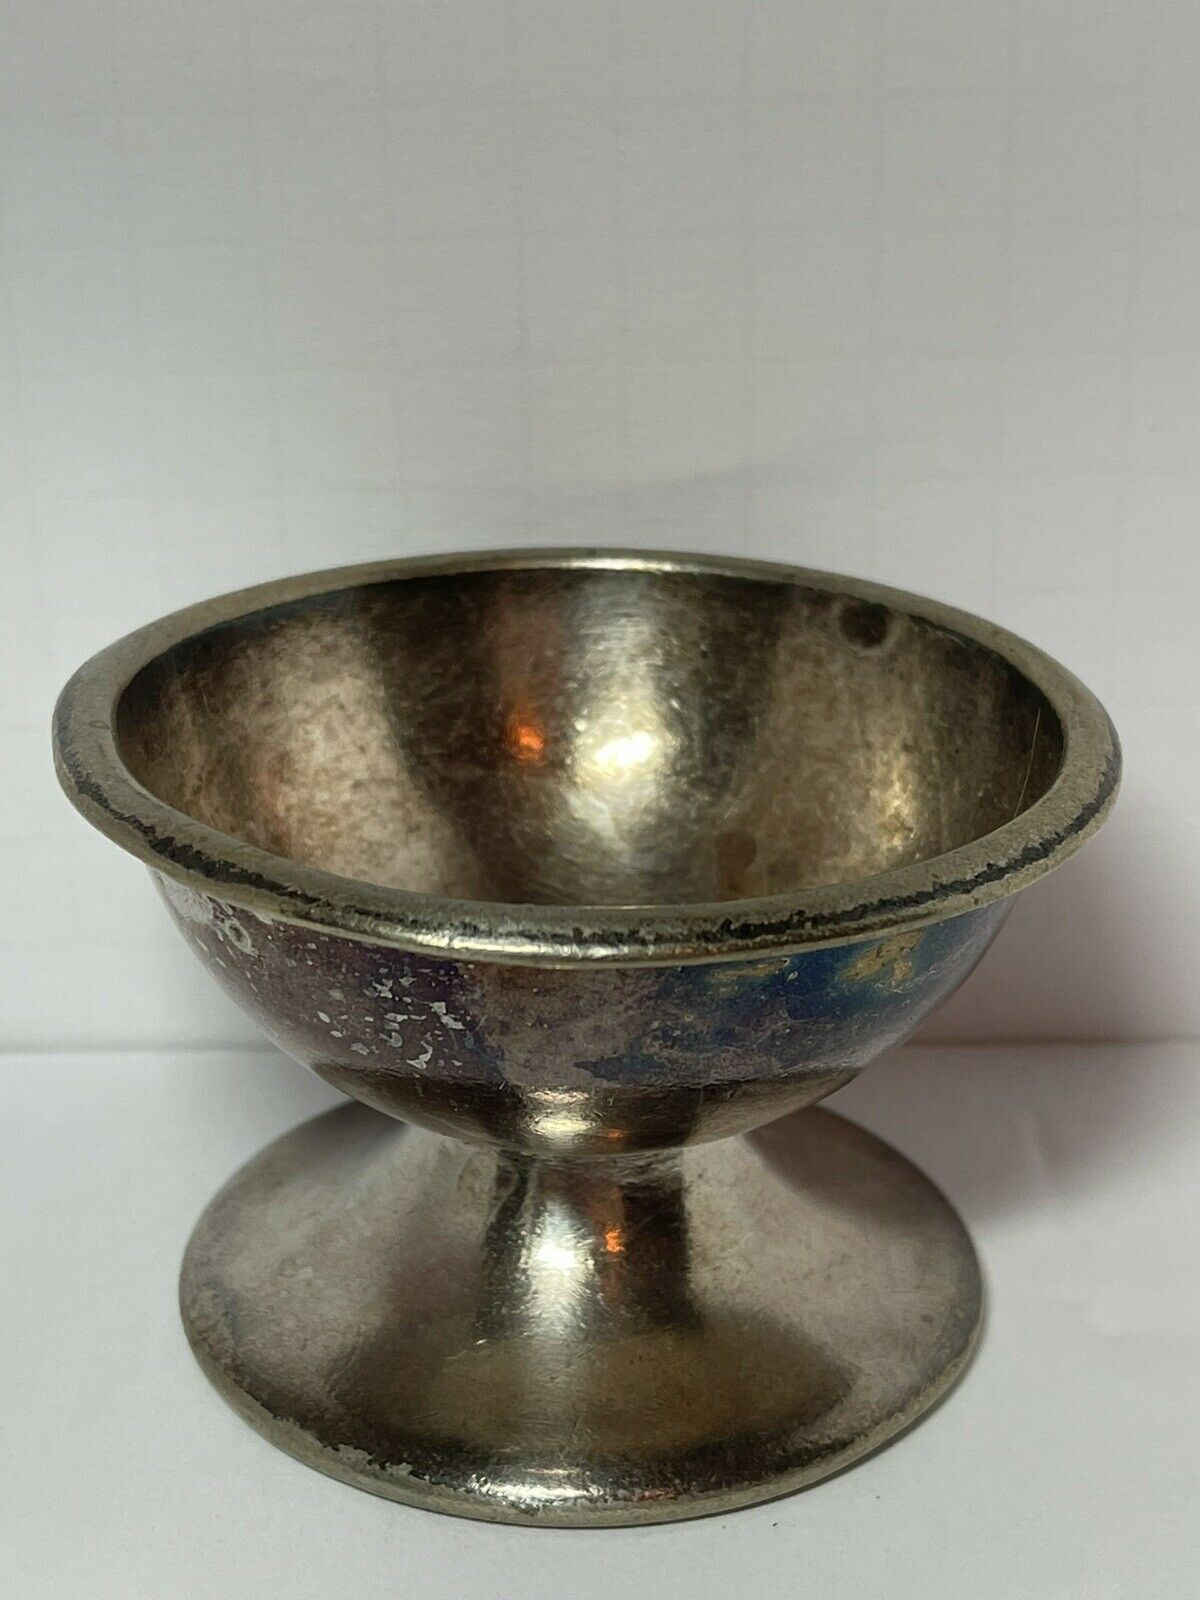 Vintage Lord Baltimore Hotel Victor S Co Silverplated 4oz Footed Desert Bowl